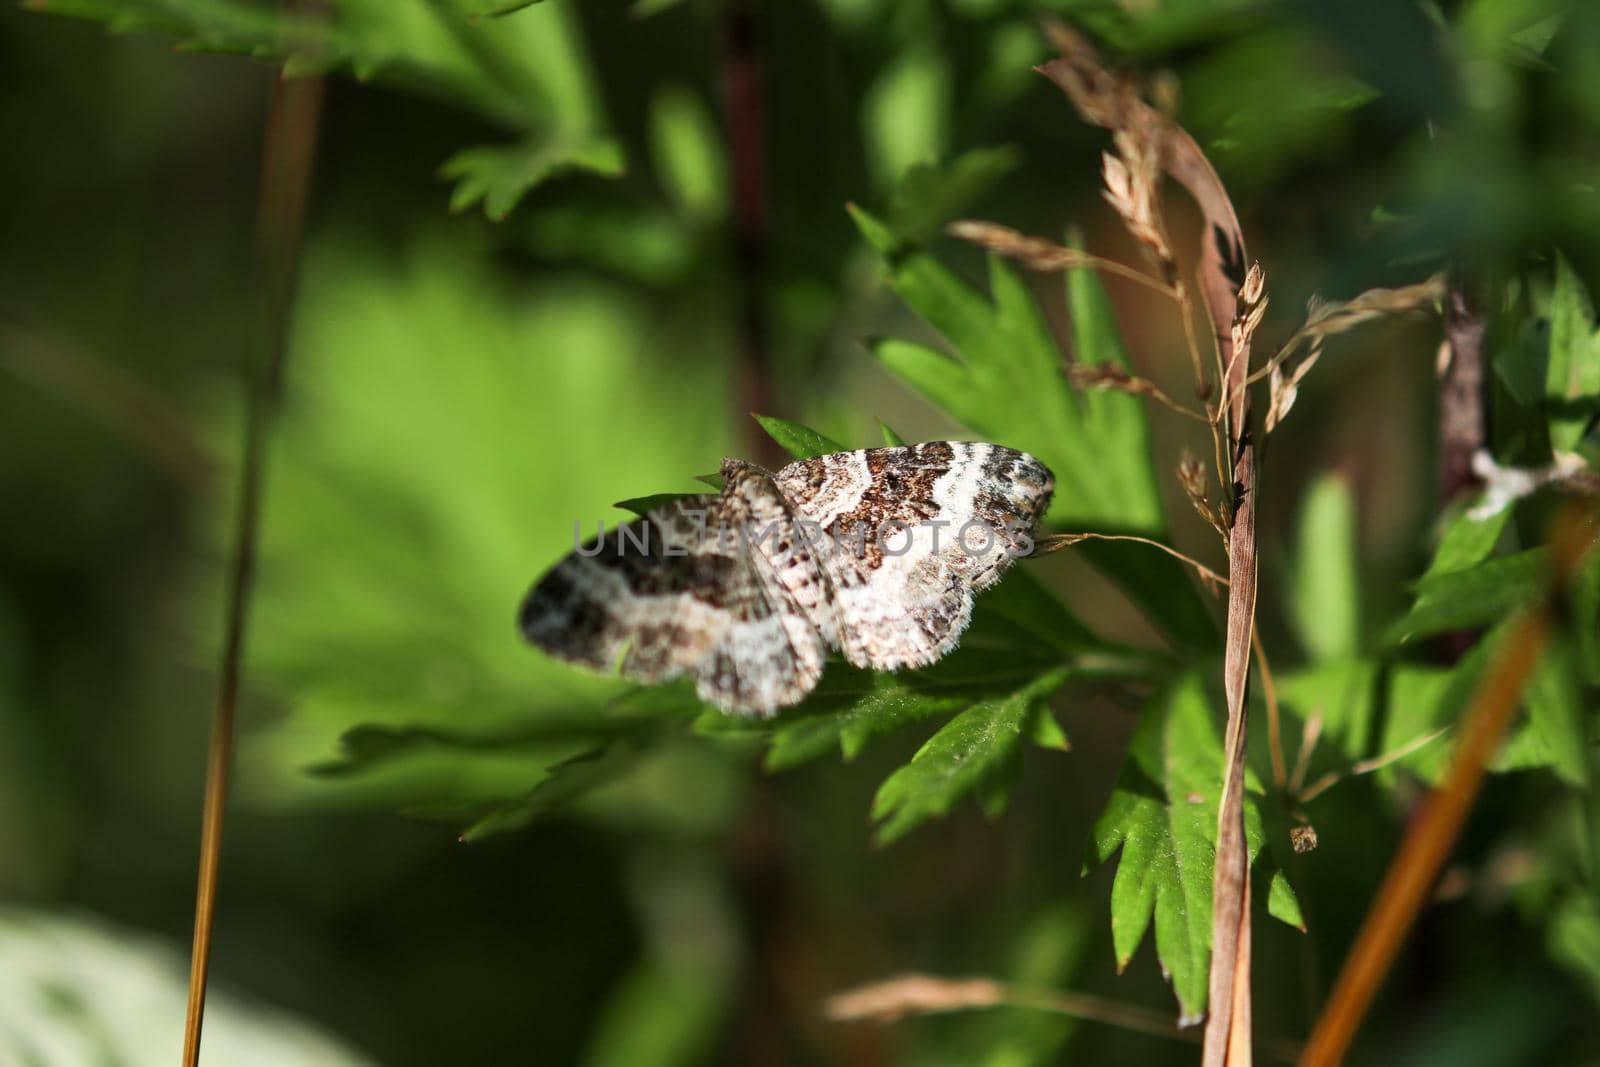 Common carpet moth, butterly on green leaf by reinerc